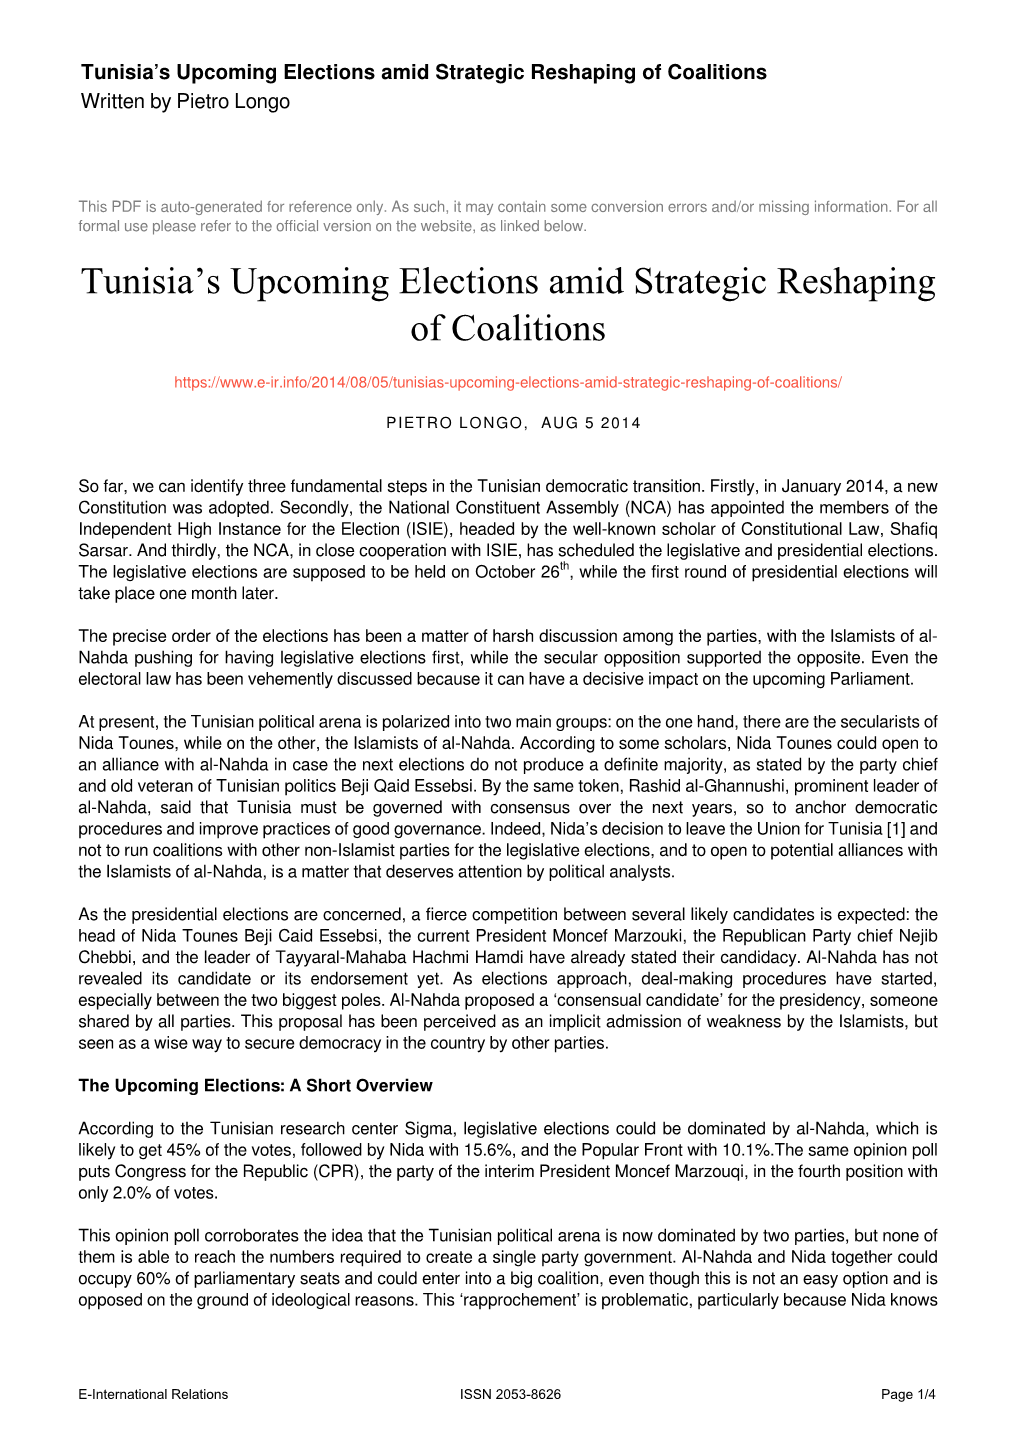 Tunisia's Upcoming Elections Amid Strategic Reshaping of Coalitions